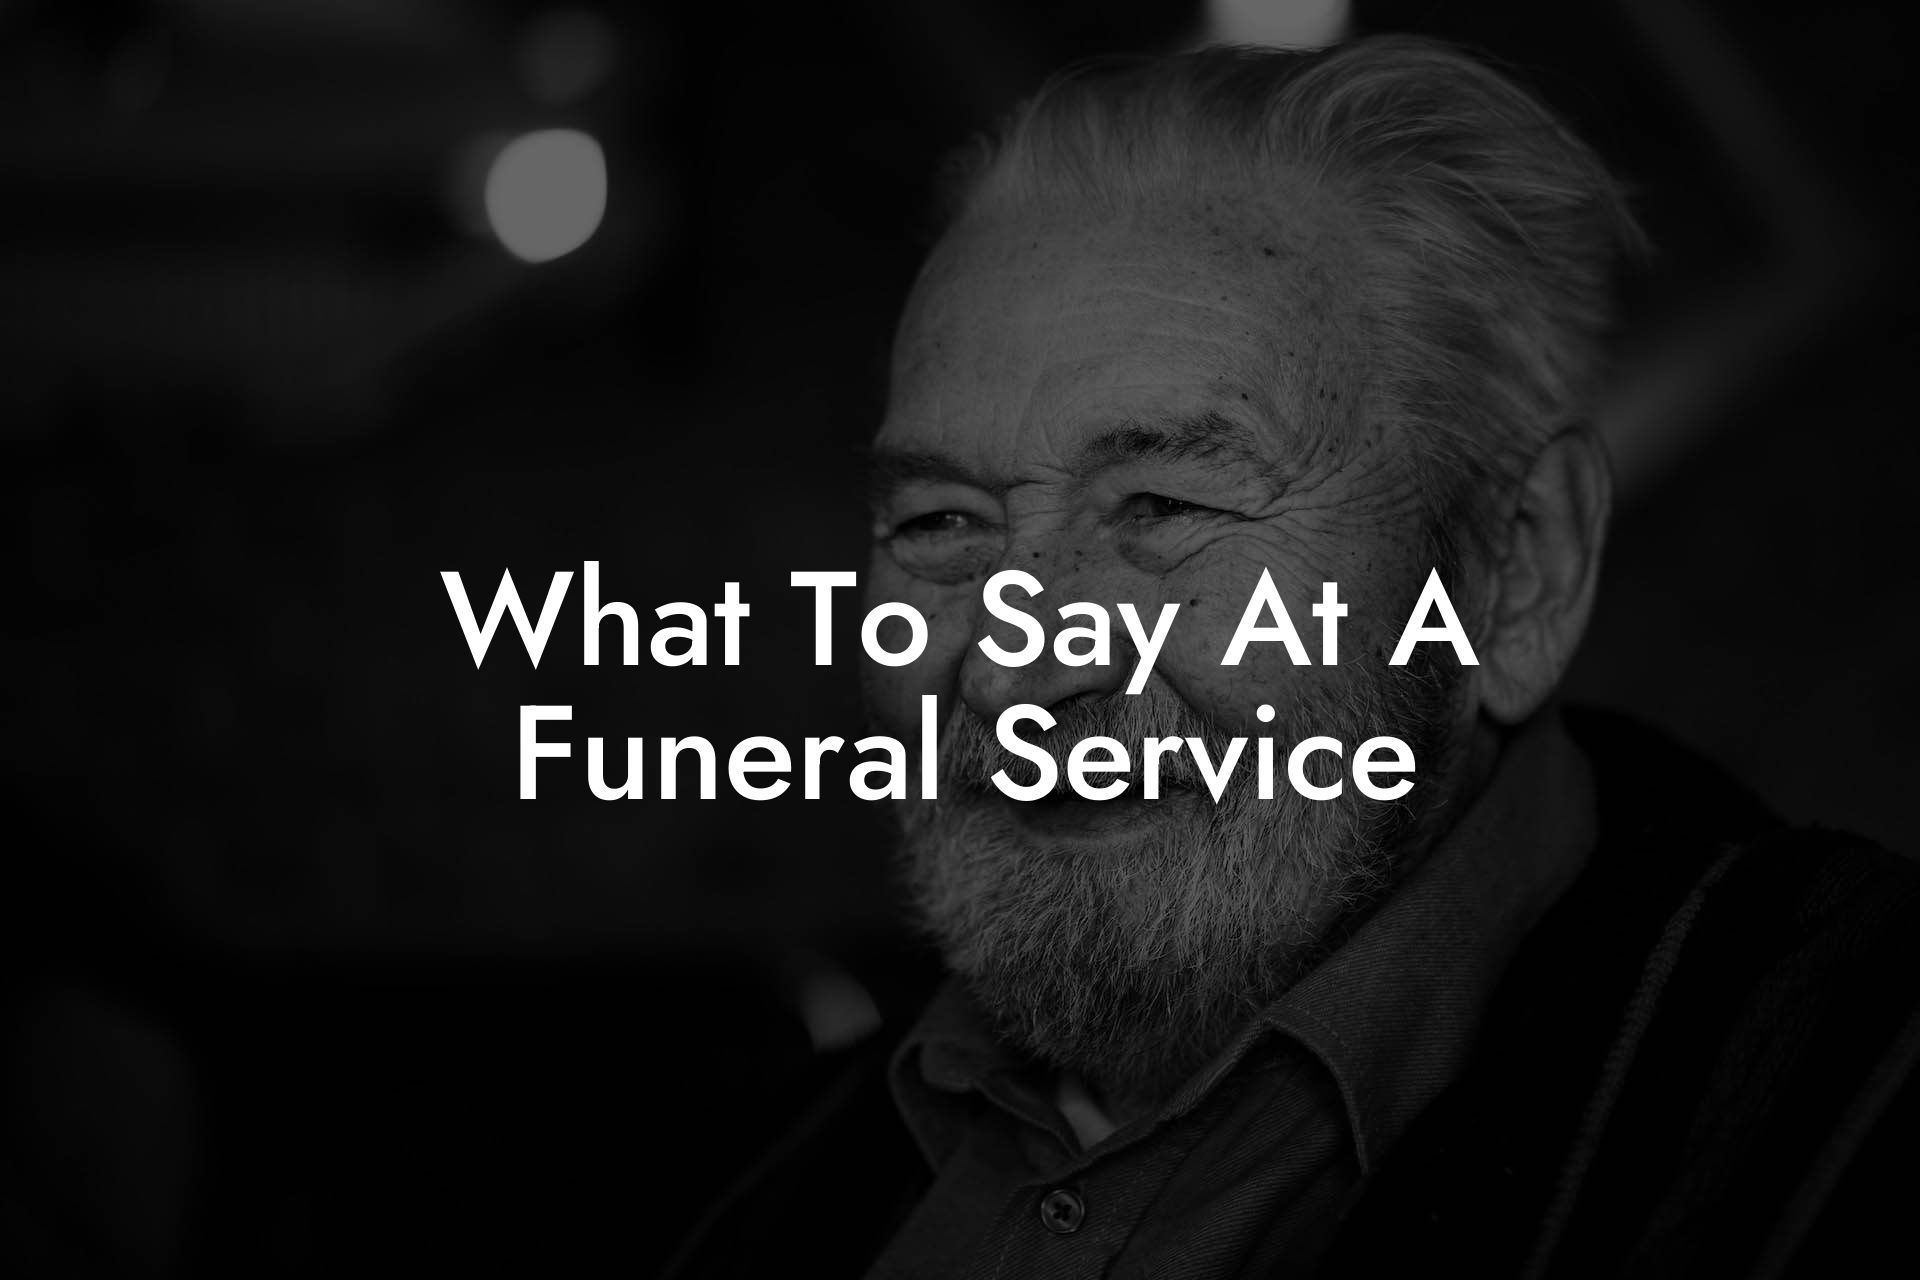 What To Say At A Funeral Service